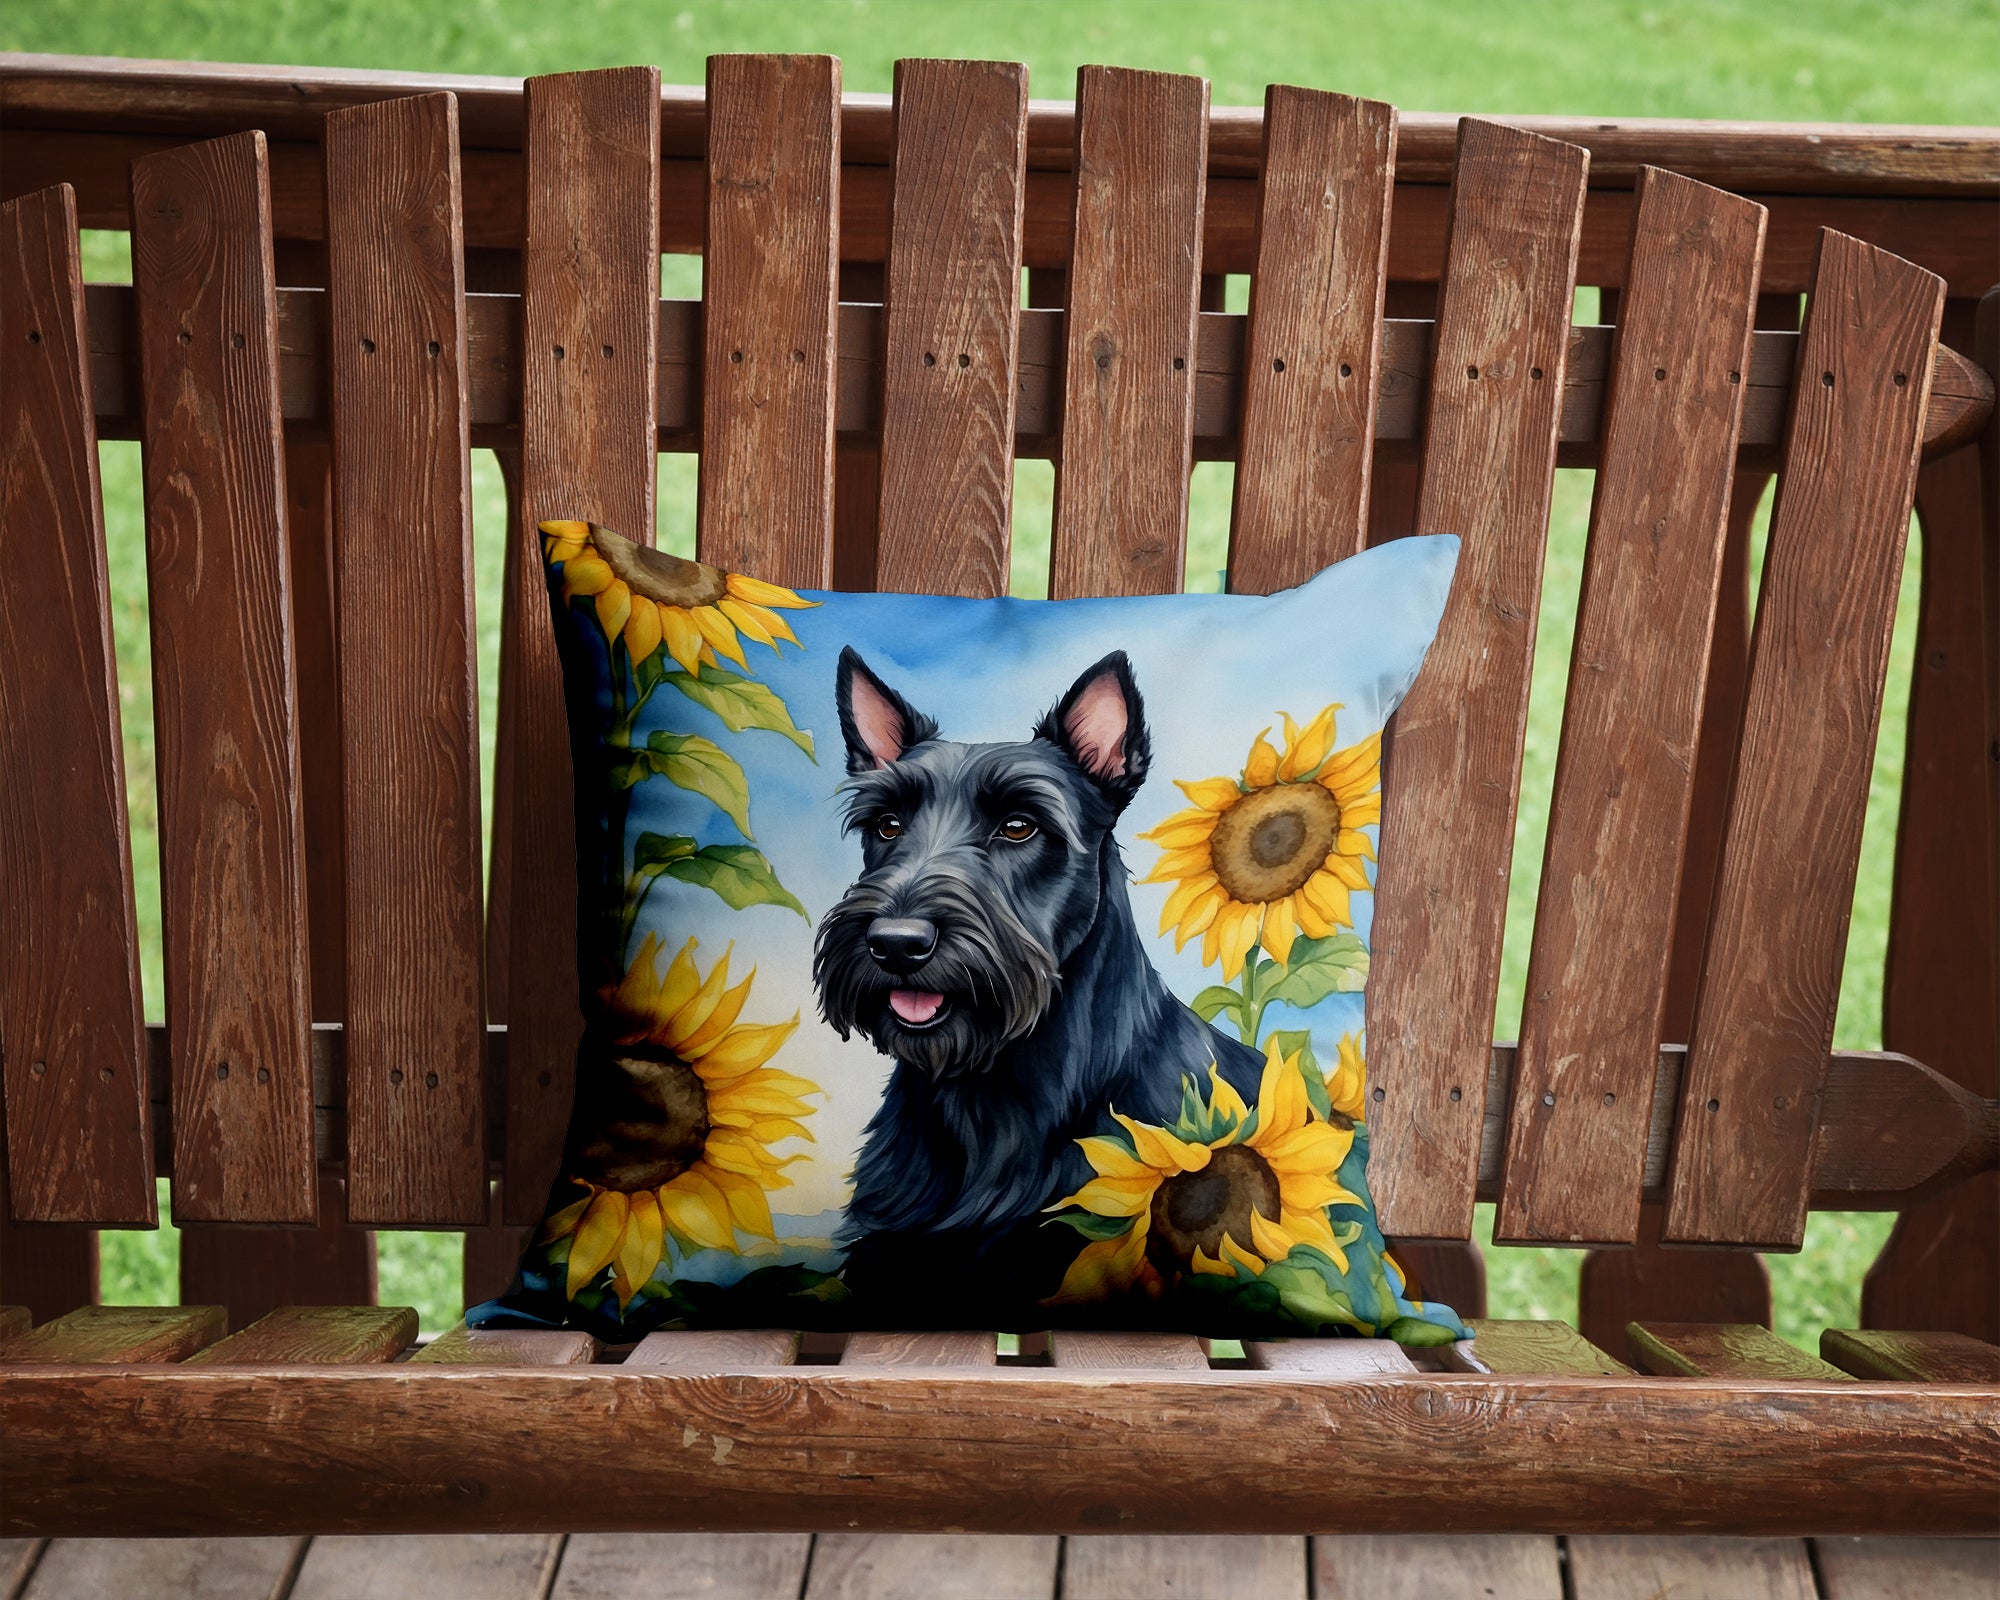 Buy this Scottish Terrier in Sunflowers Throw Pillow